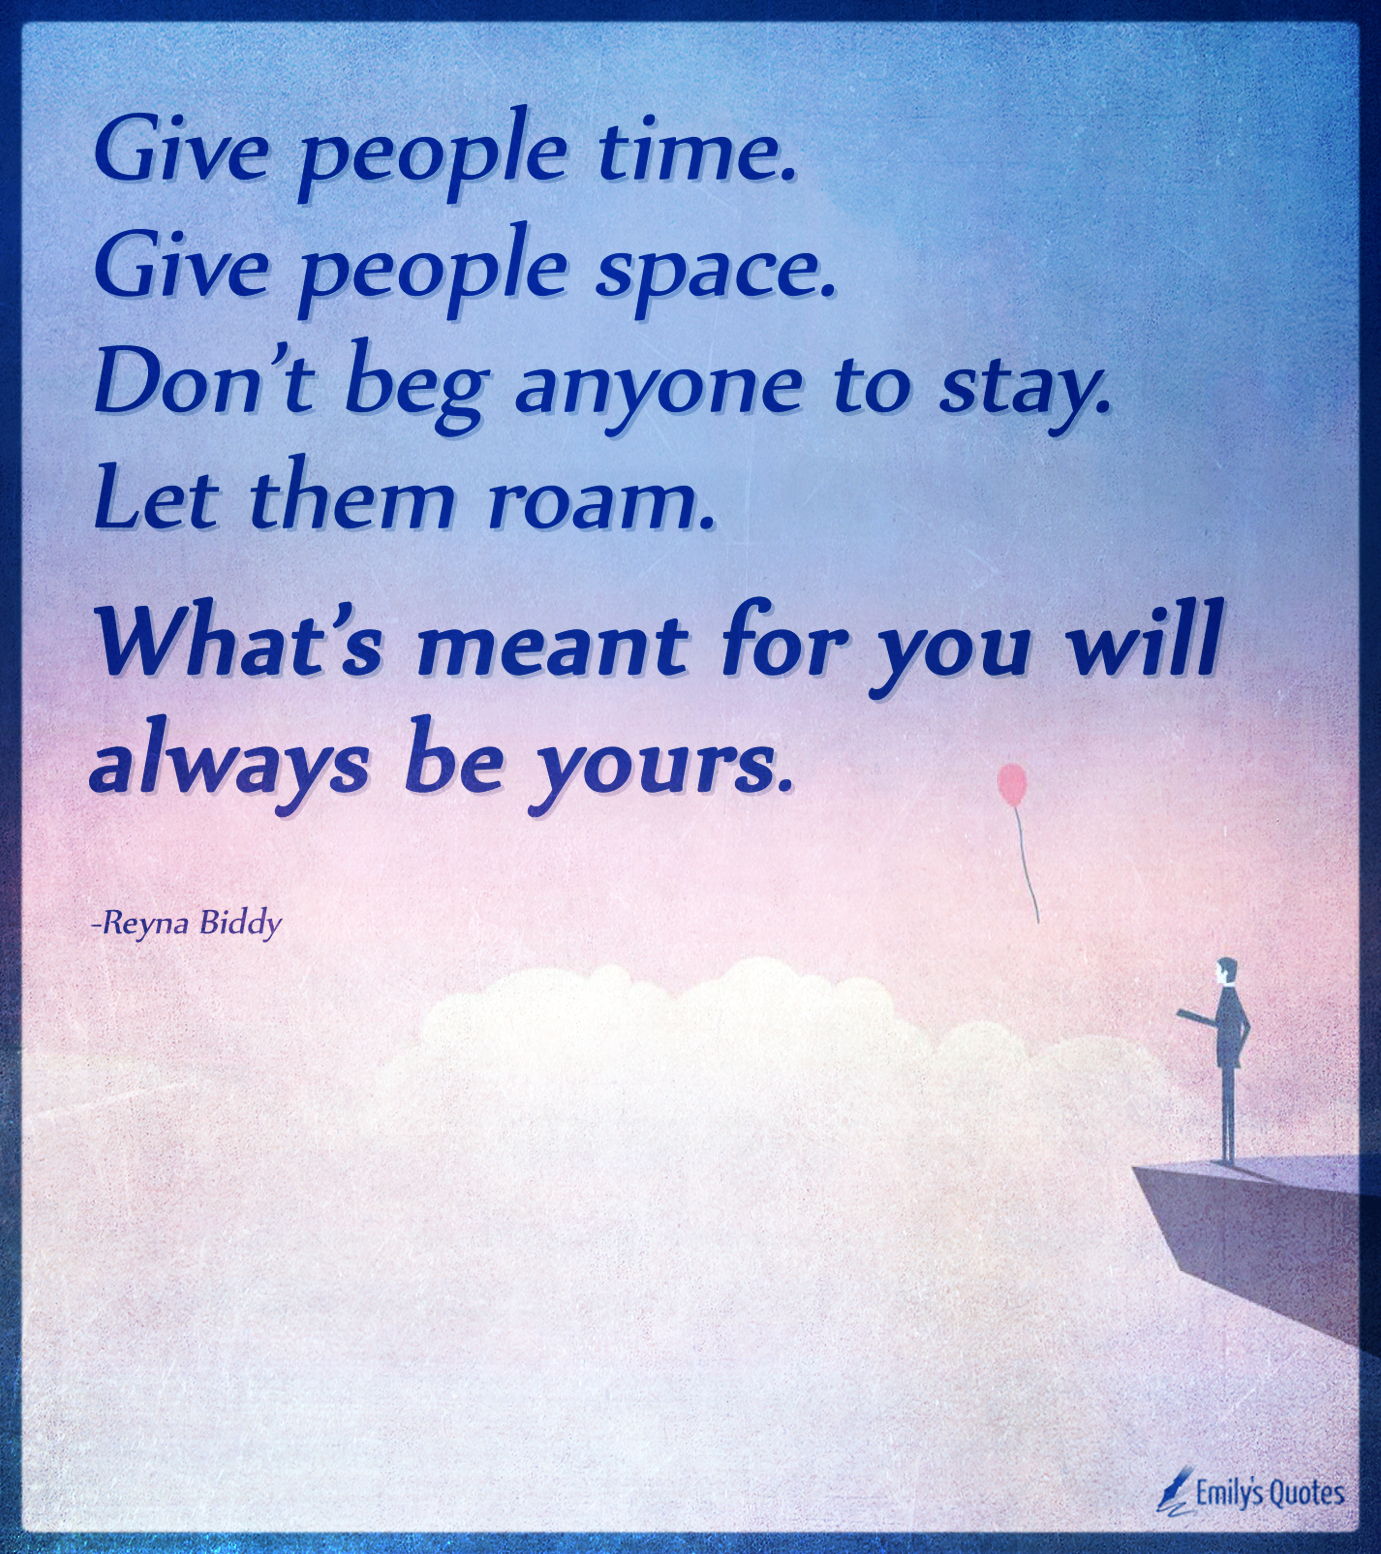 Give people time. Give people space. Don’t beg anyone to stay. Let them roam